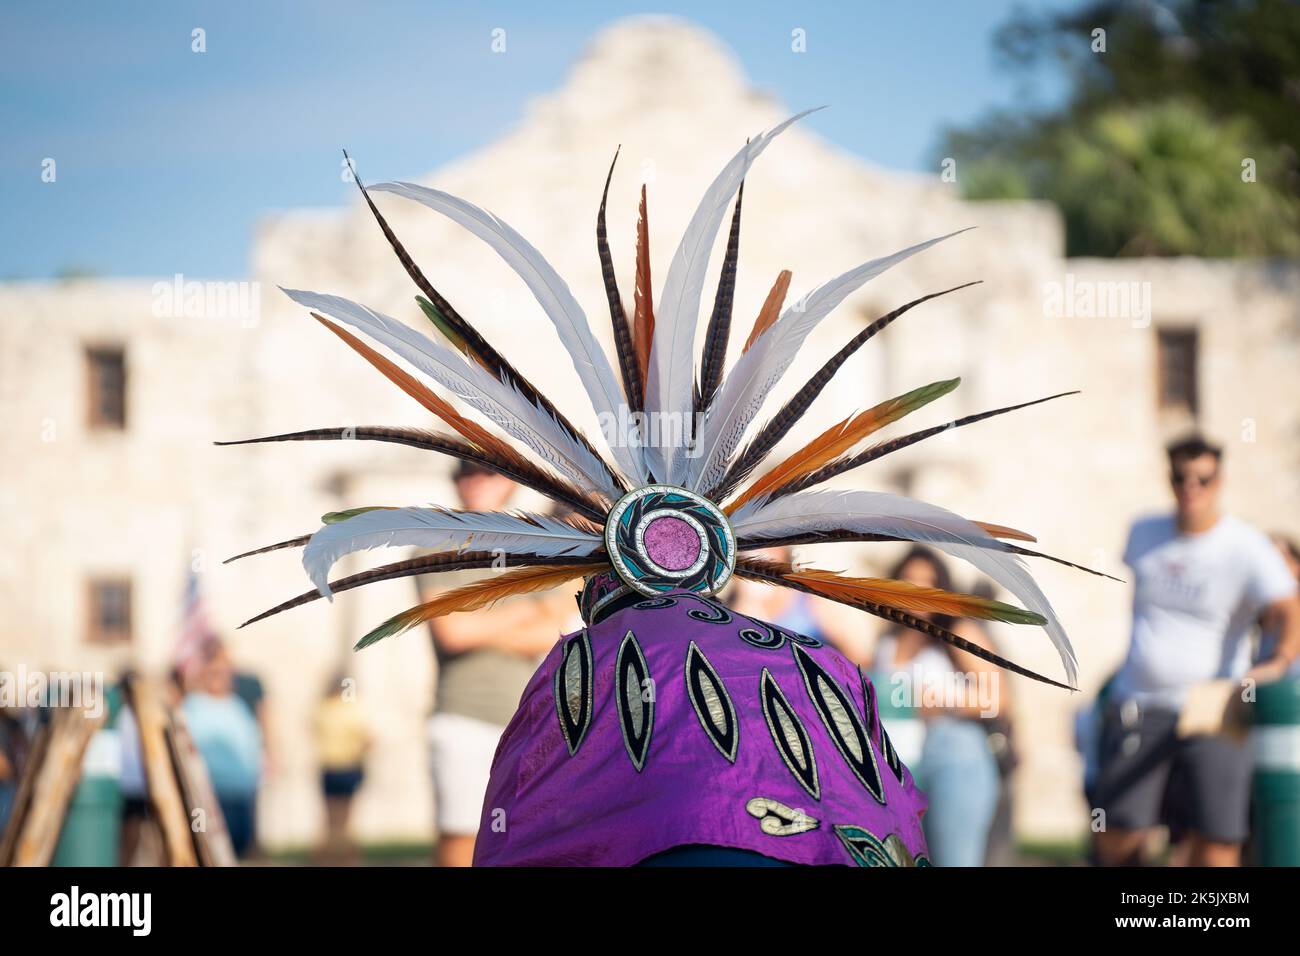 An Indigenous woman in a traditional headdress dances in front of the Alamo in San Antonio, Texas, during an 'Indigenous Dignity Day' march. Stock Photo